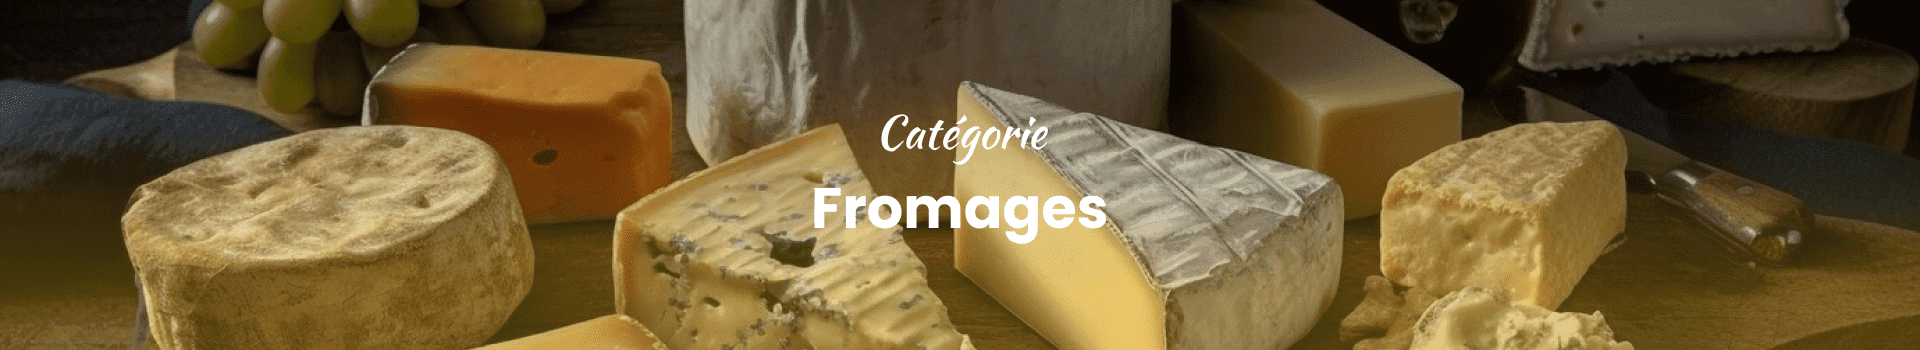 FROMAGERIE